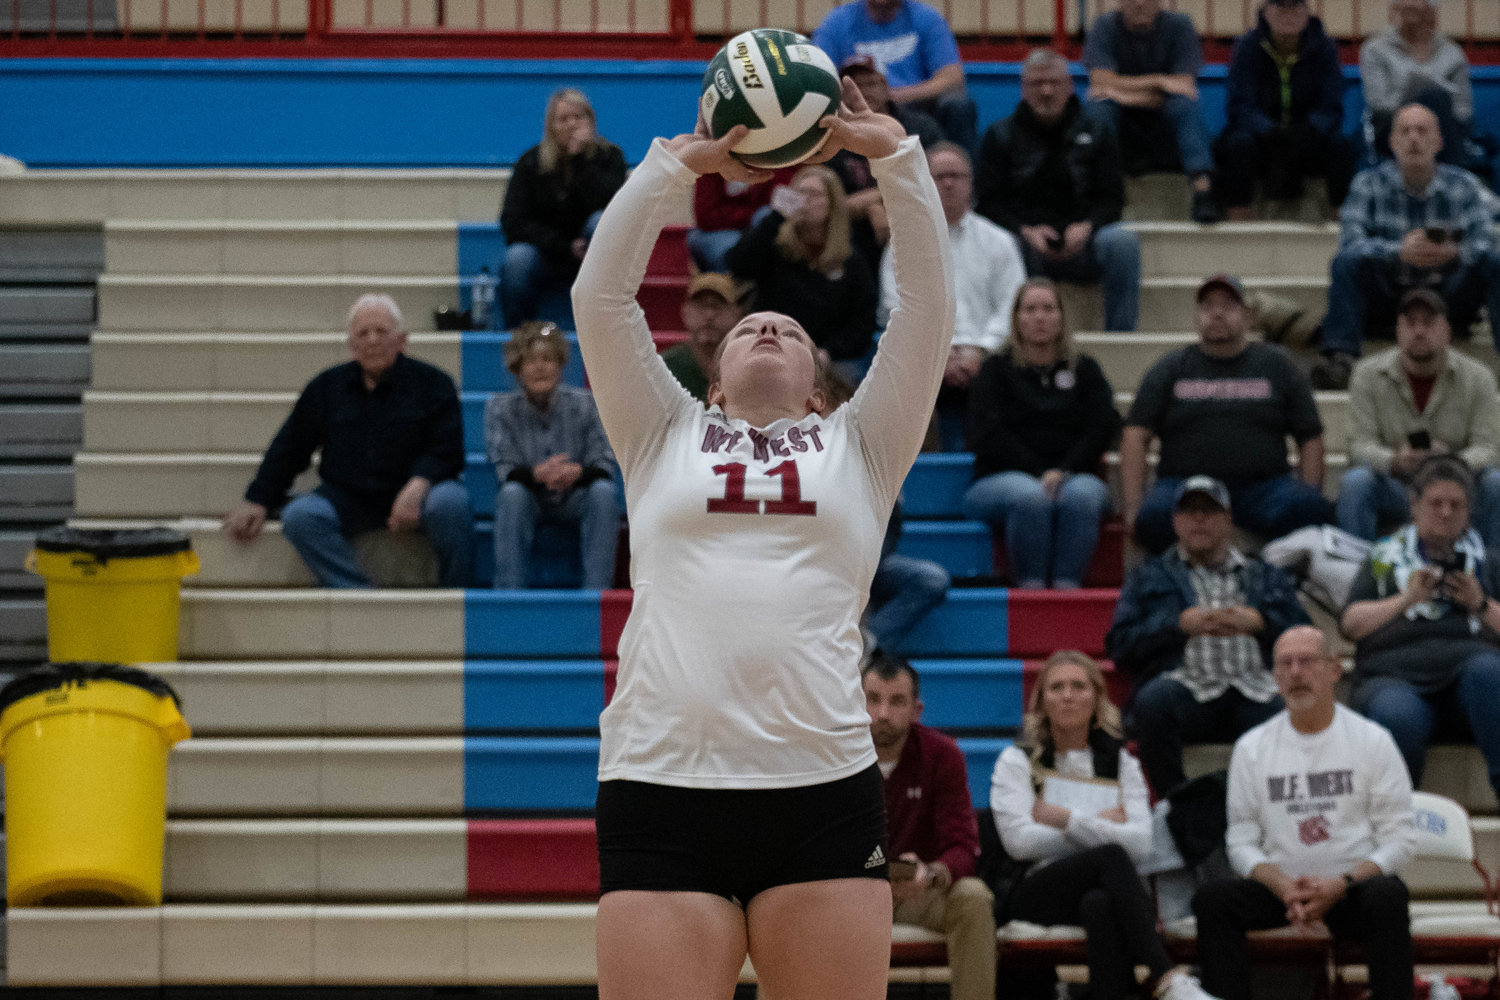 W.F. West setter Savannah Hawkins passes to a teammate against Ridgefield in the first round of the 2A District 4 tournament at Mark Morris Nov. 10.